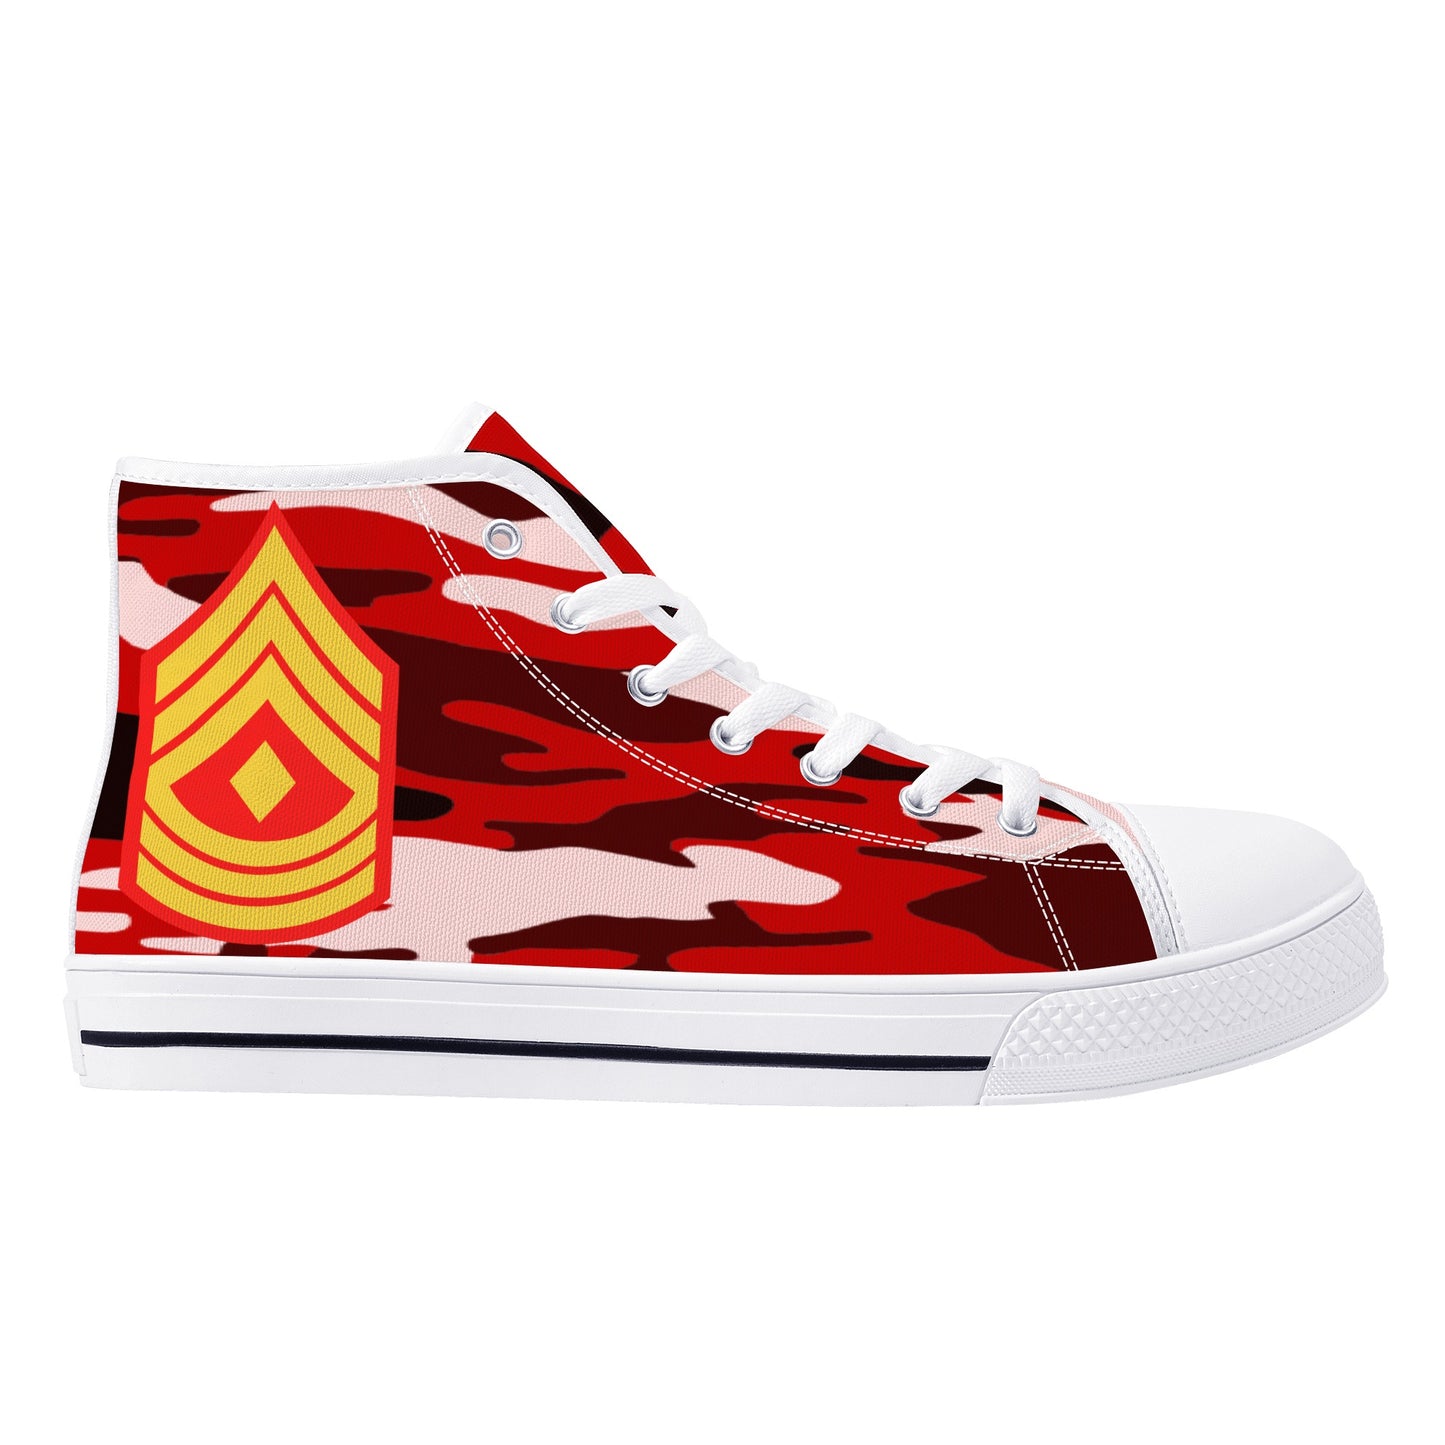 Stand out  with the  Nugget Army  Womens High Top Canvas Shoes  available at Hey Nugget. Grab yours today!